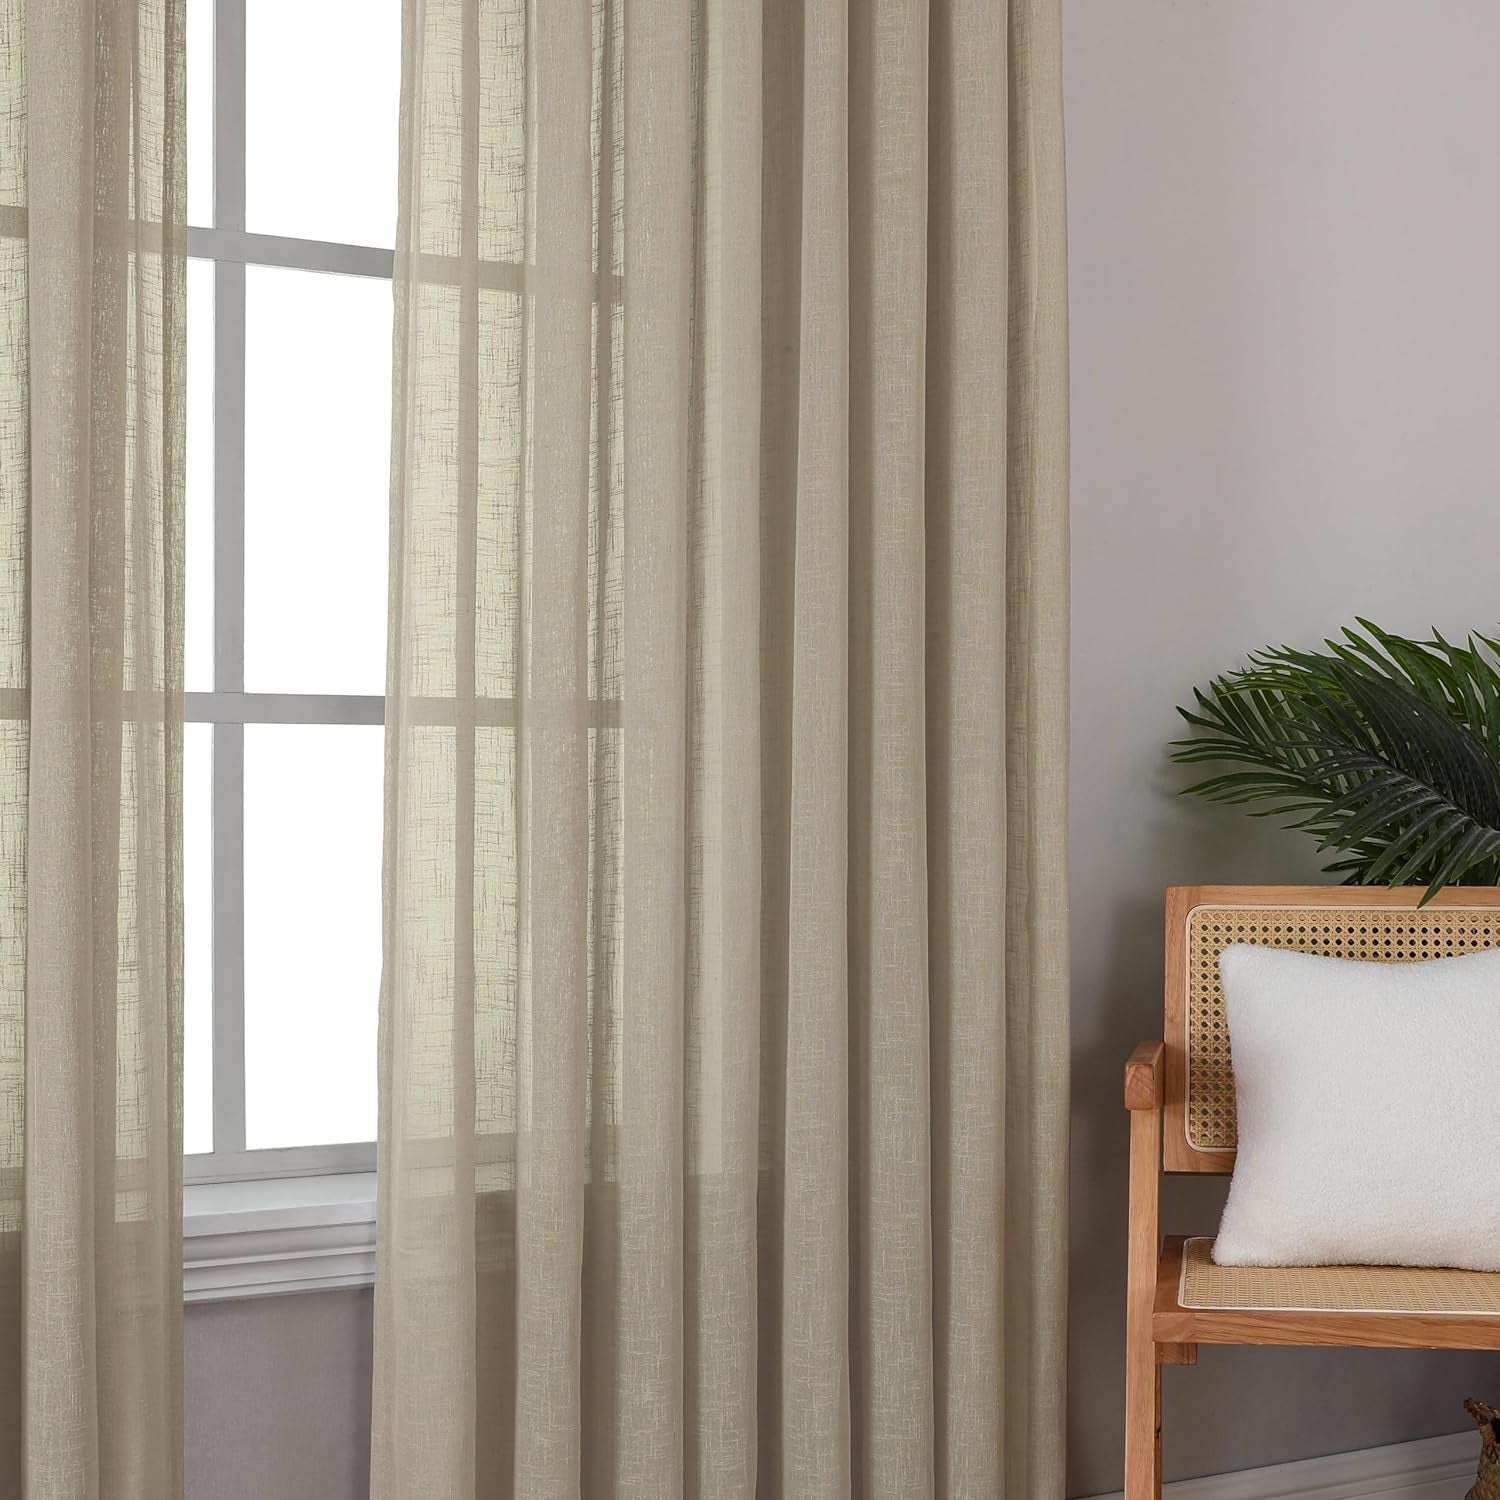 Hascemon Pinch Pleated Curtains, Sheer Drapes Light Filtering Curtains for Living Room and Bedroom Decor (1Panel, Light-Brown,100X96)  Hascemon   